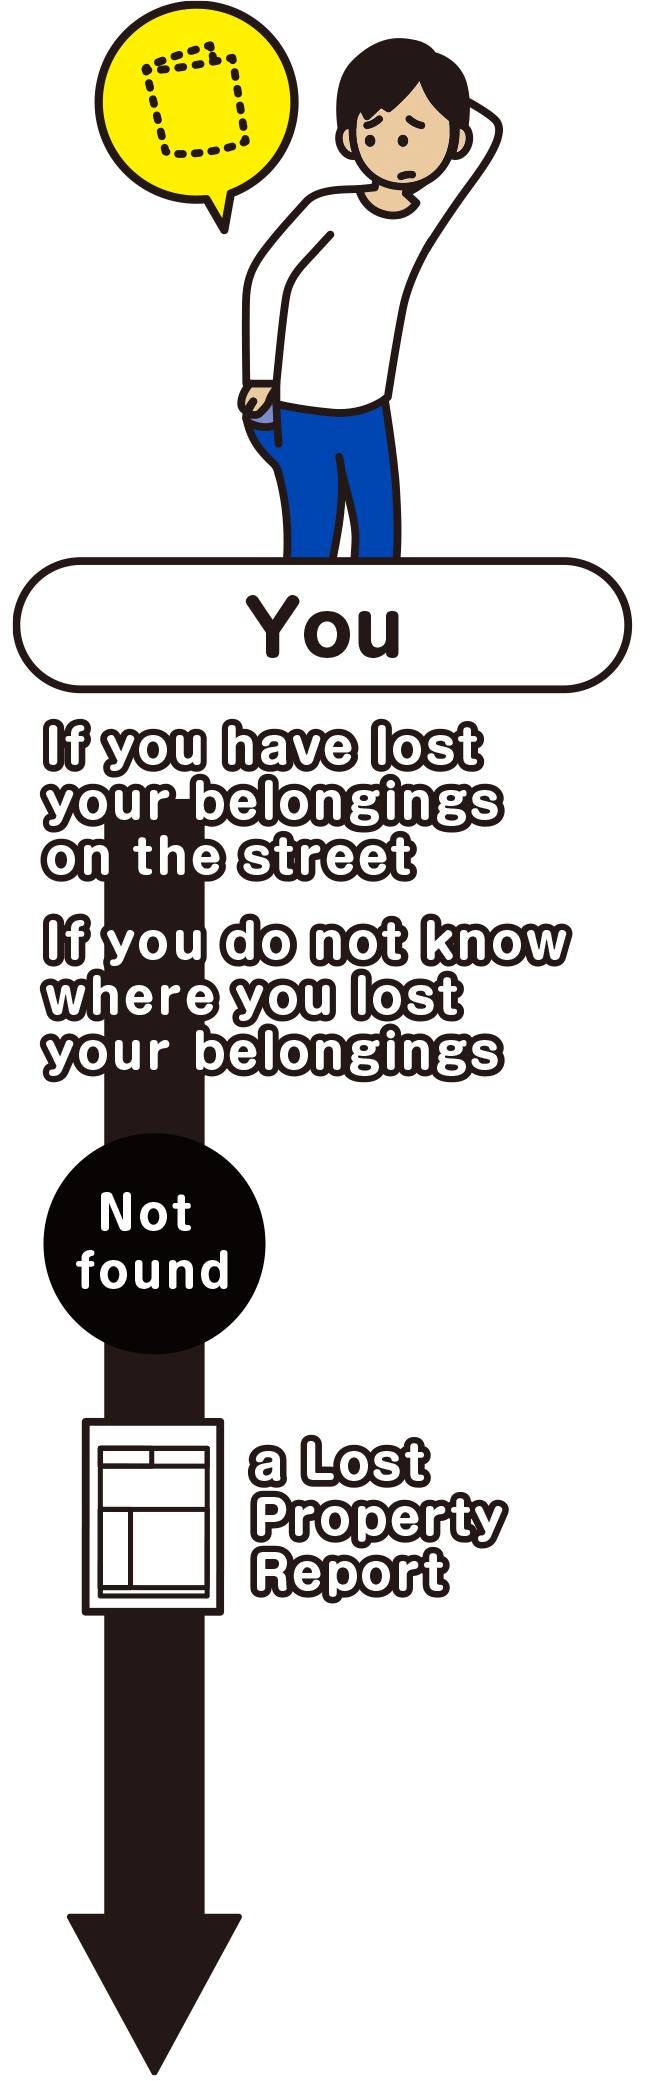 Did you lose your belonging on the street (not inside a facility)? Or, if you do not know where you lost your belonging...　Submit a Lost Property Report to the police.